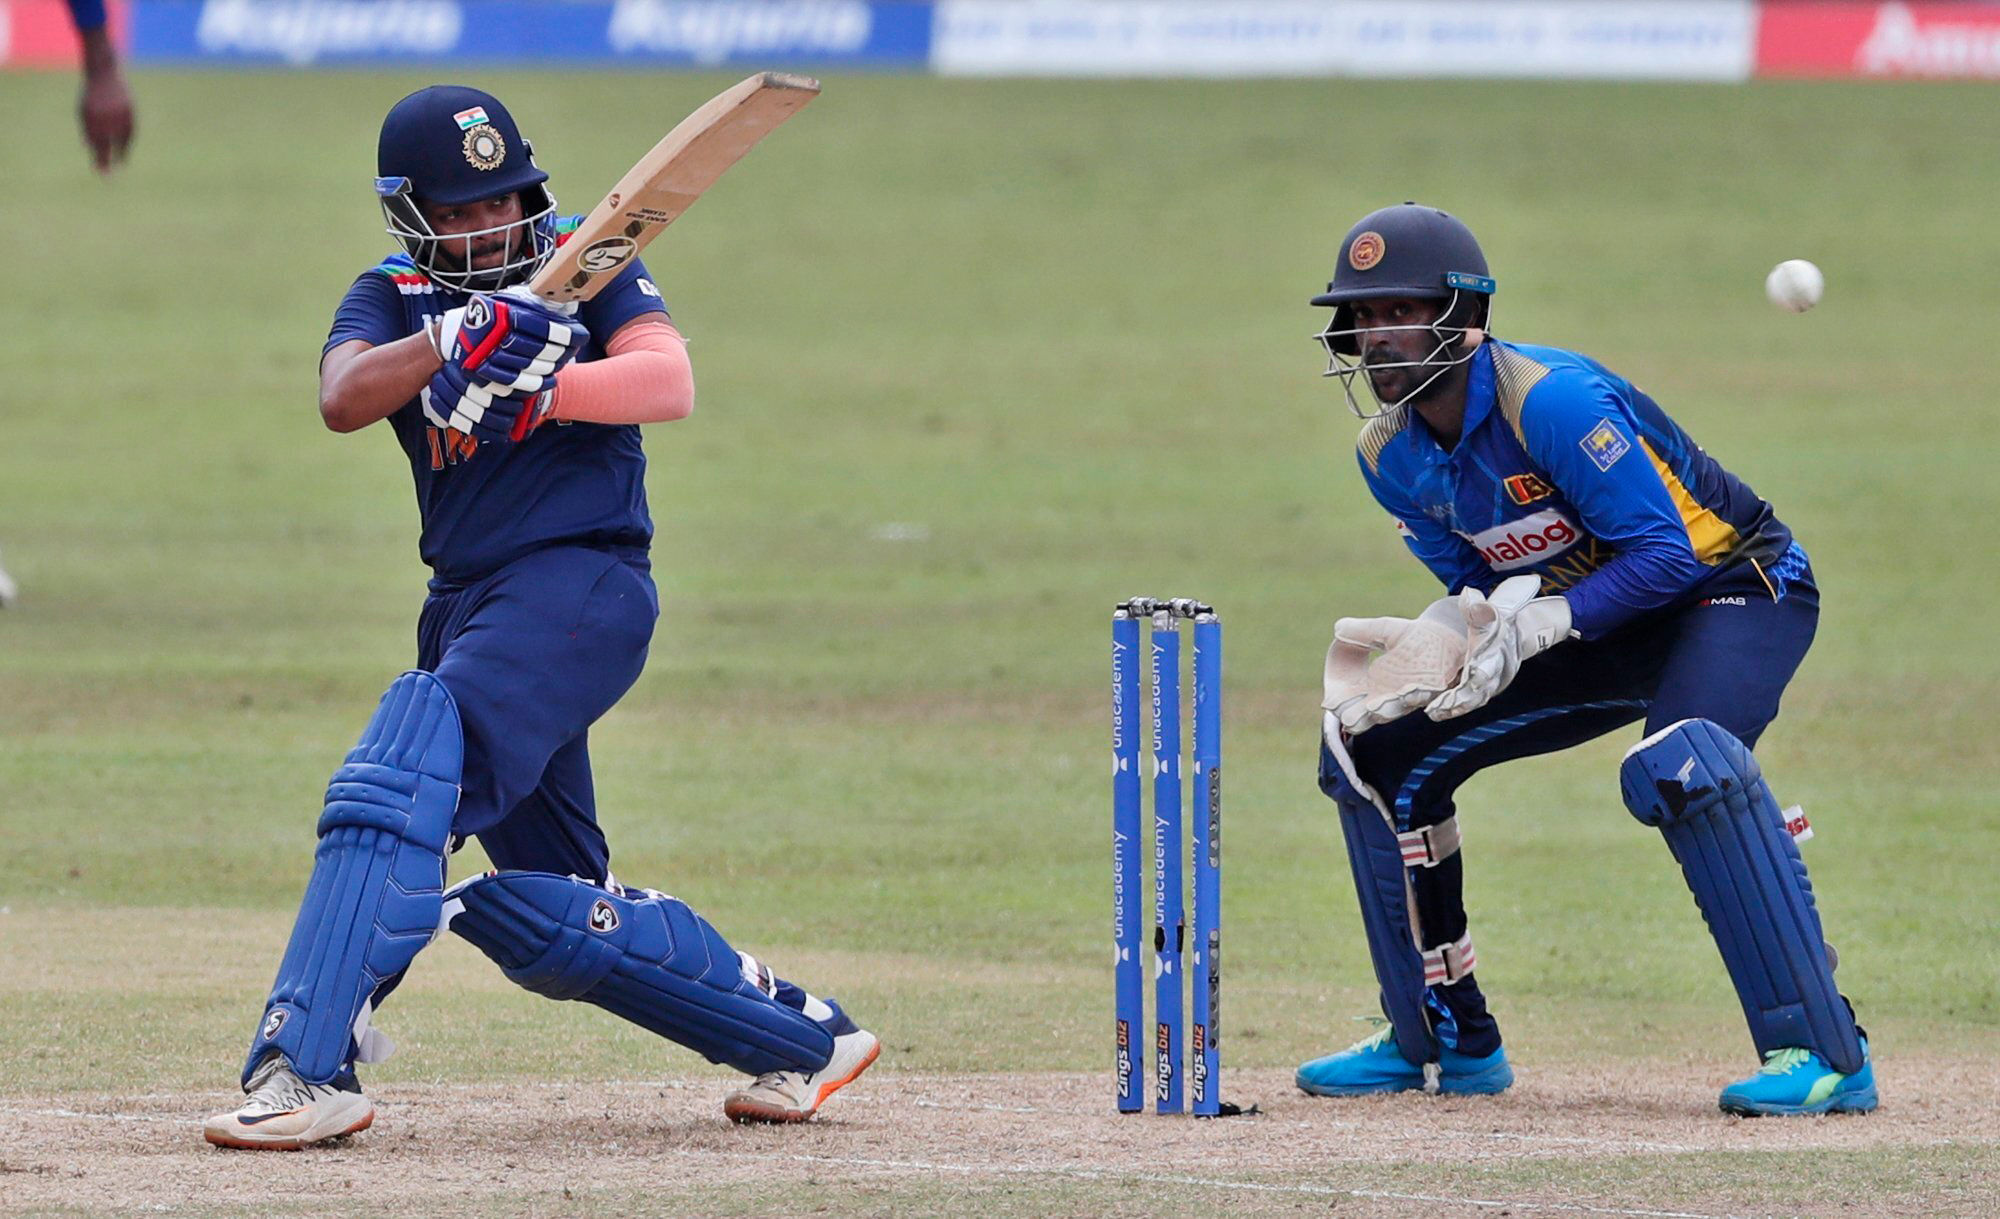 2nd T20I preview: Depleted India aim to seal series vs Sri Lanka